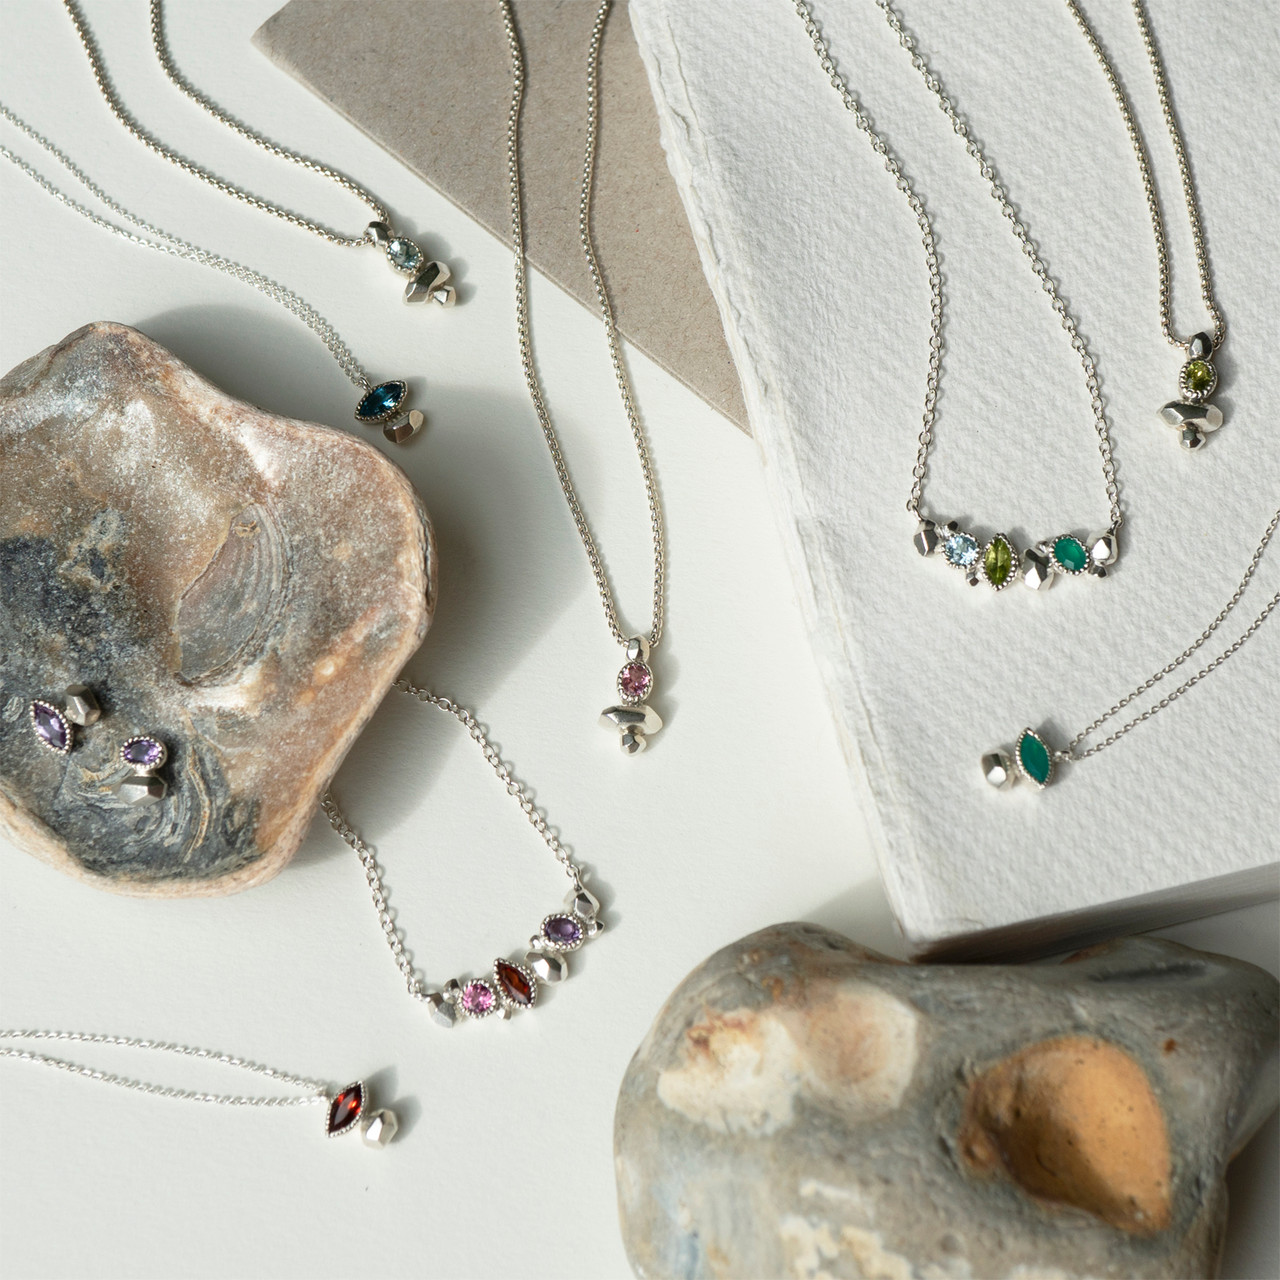 Gea Column Necklace in Silver with Pink Tourmaline, Maria Manola, tomfoolery